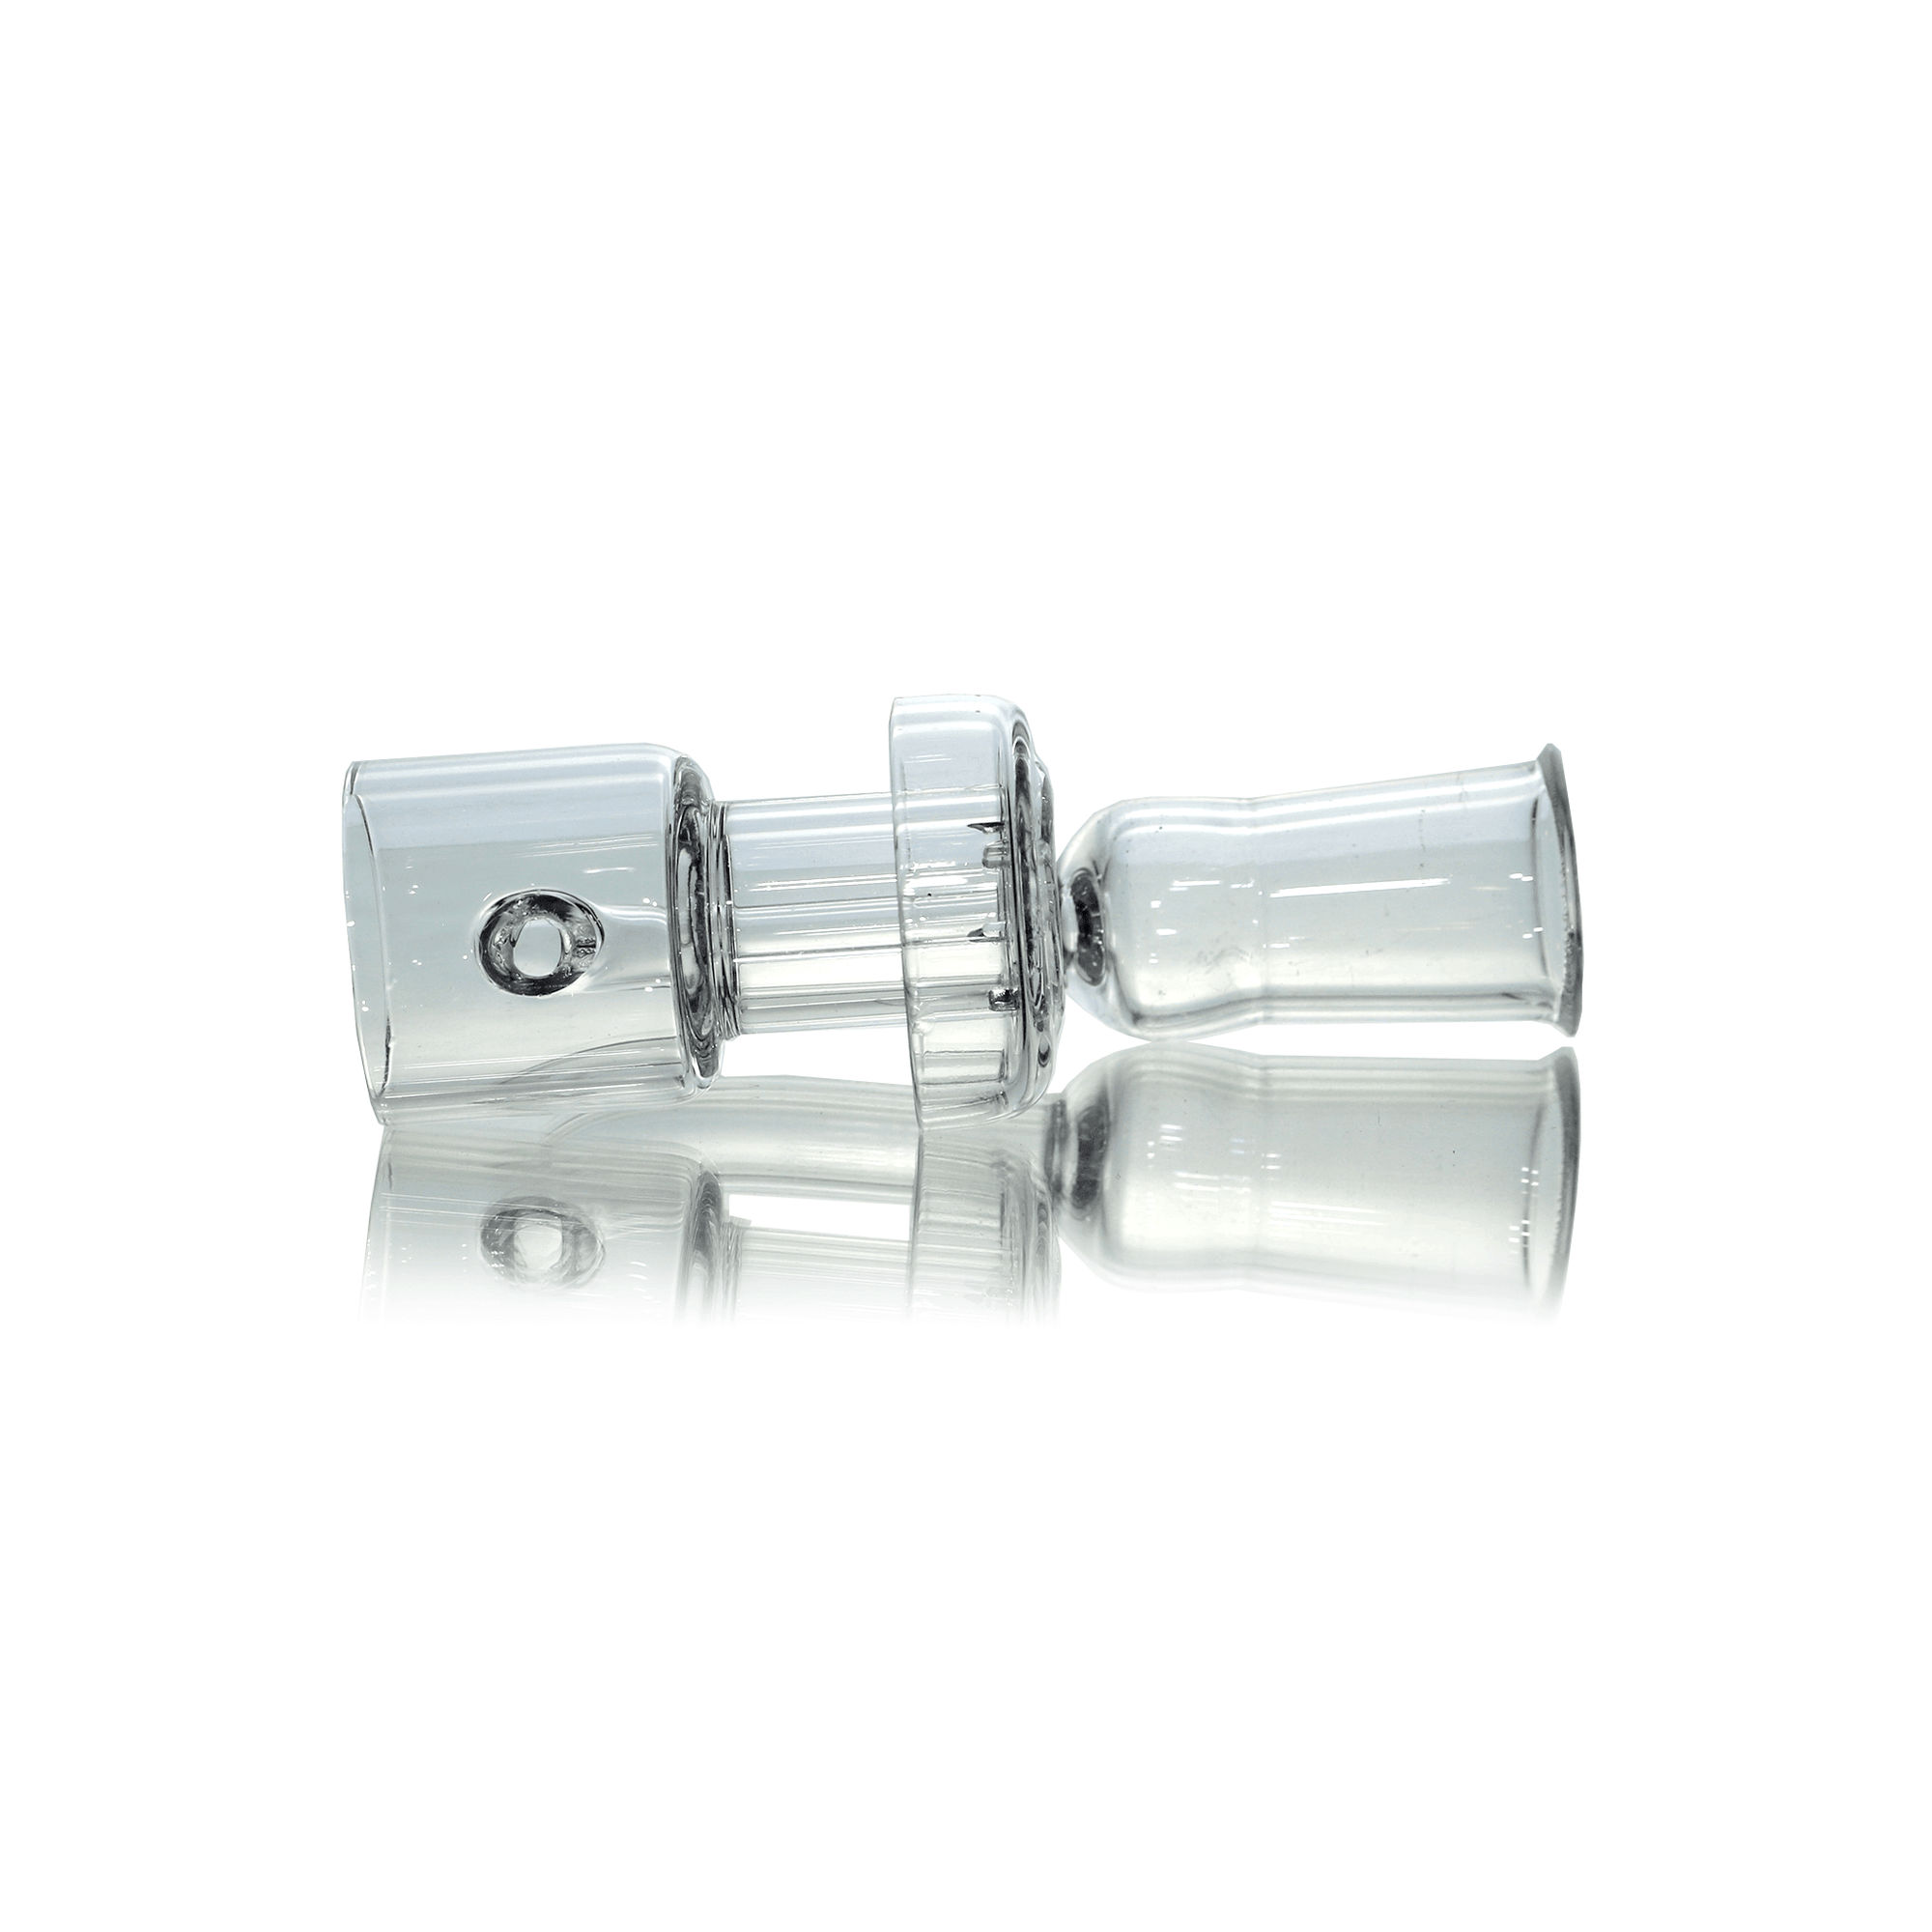 Quartz Banger Terp Slurper | 14mm Female With Spinning Cap | Full Stack | the dabbing specialists